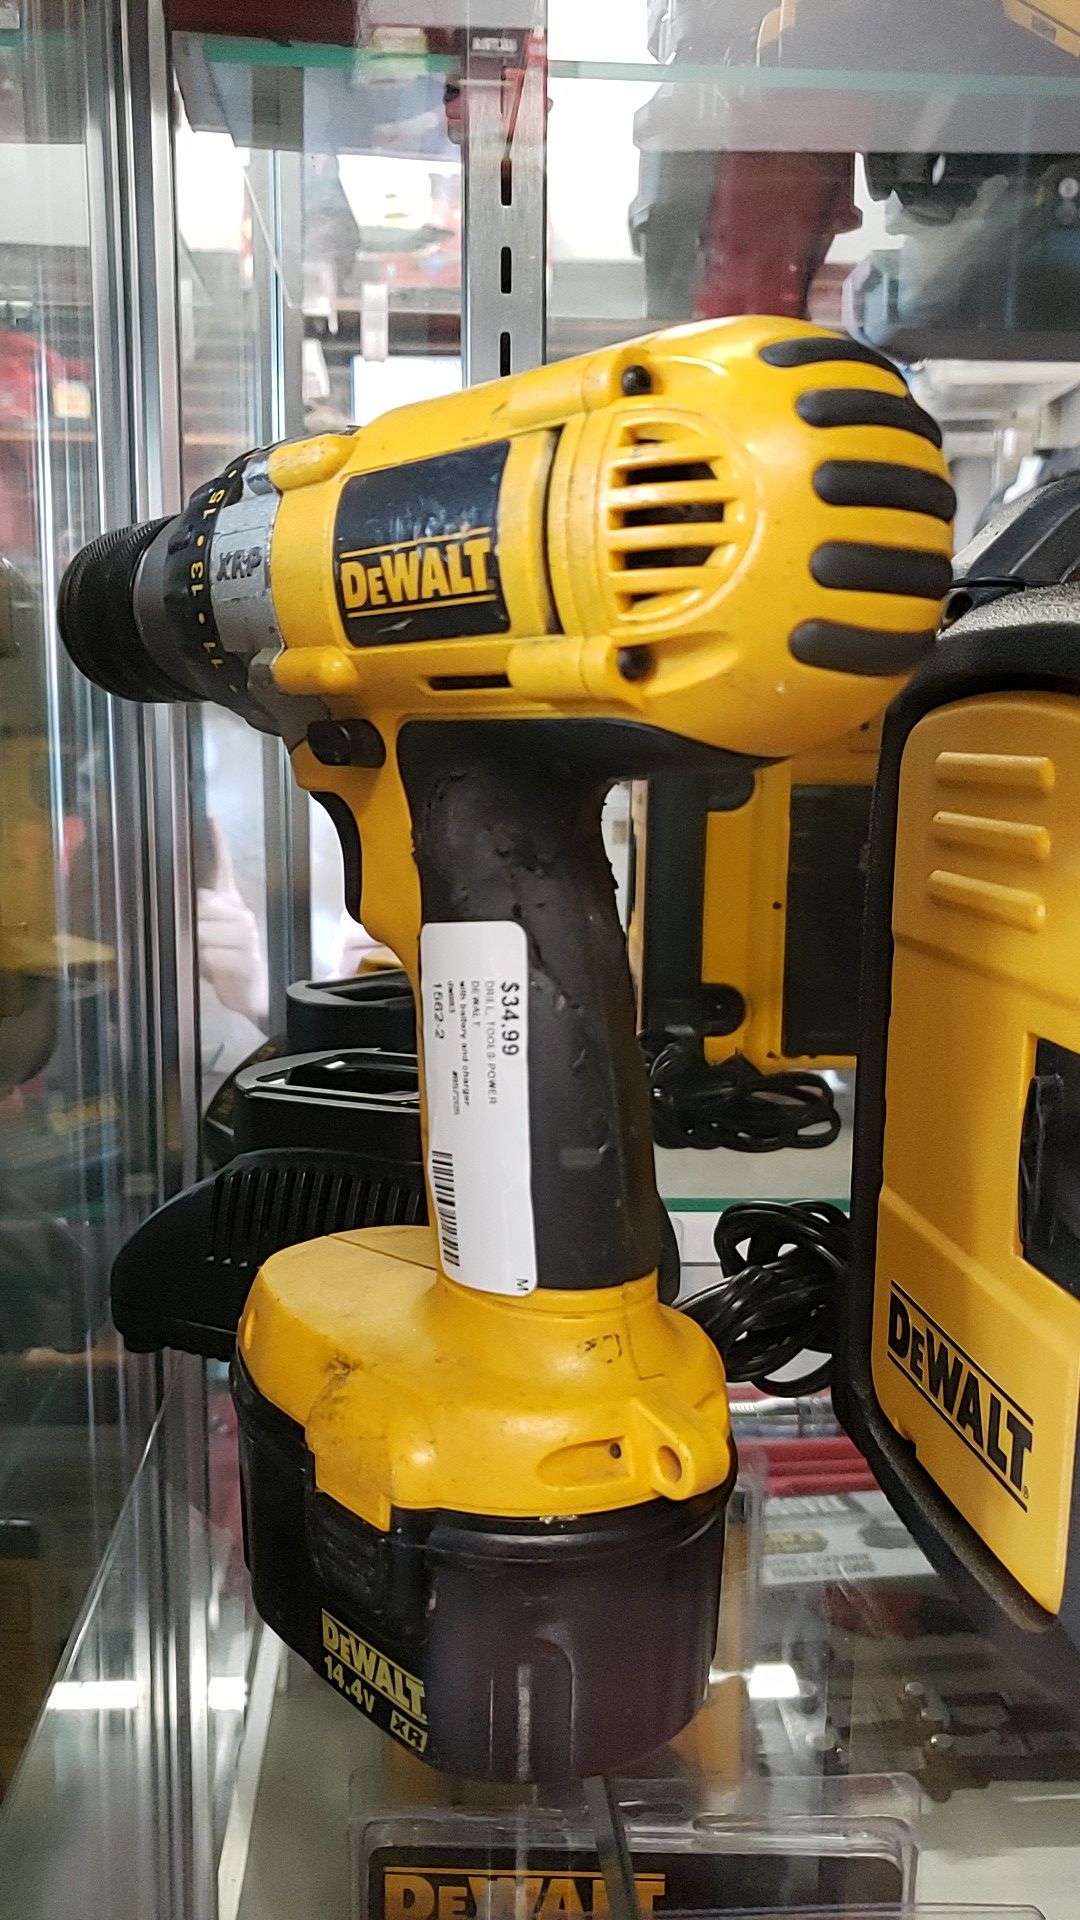 Power Drill Tool with battery and charger included